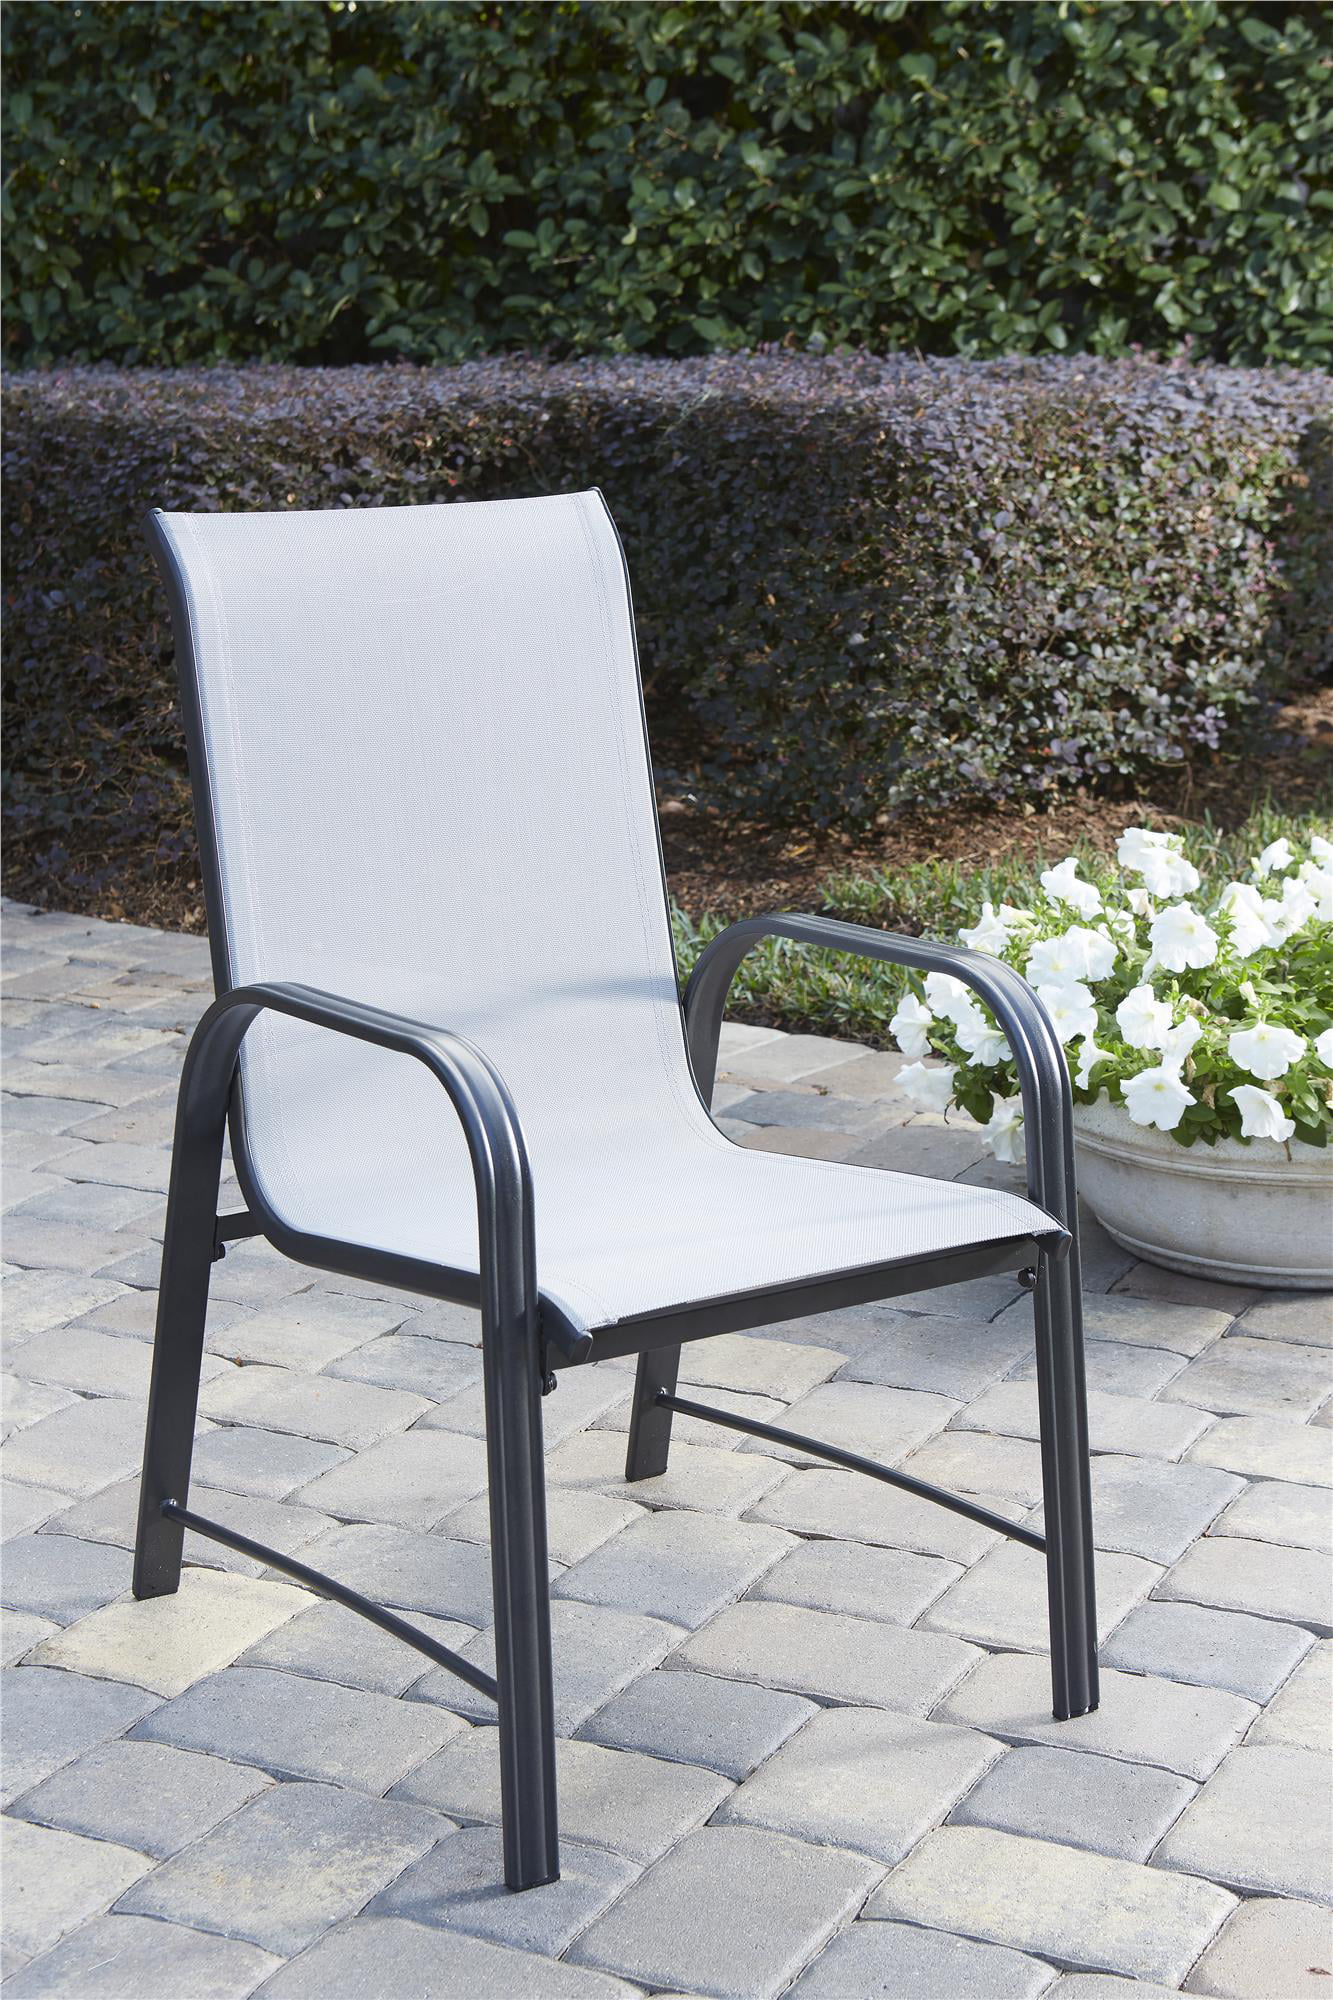 Cosco Outdoor Living Paloma Steel Patio Dining Chairs Light Gray Sling